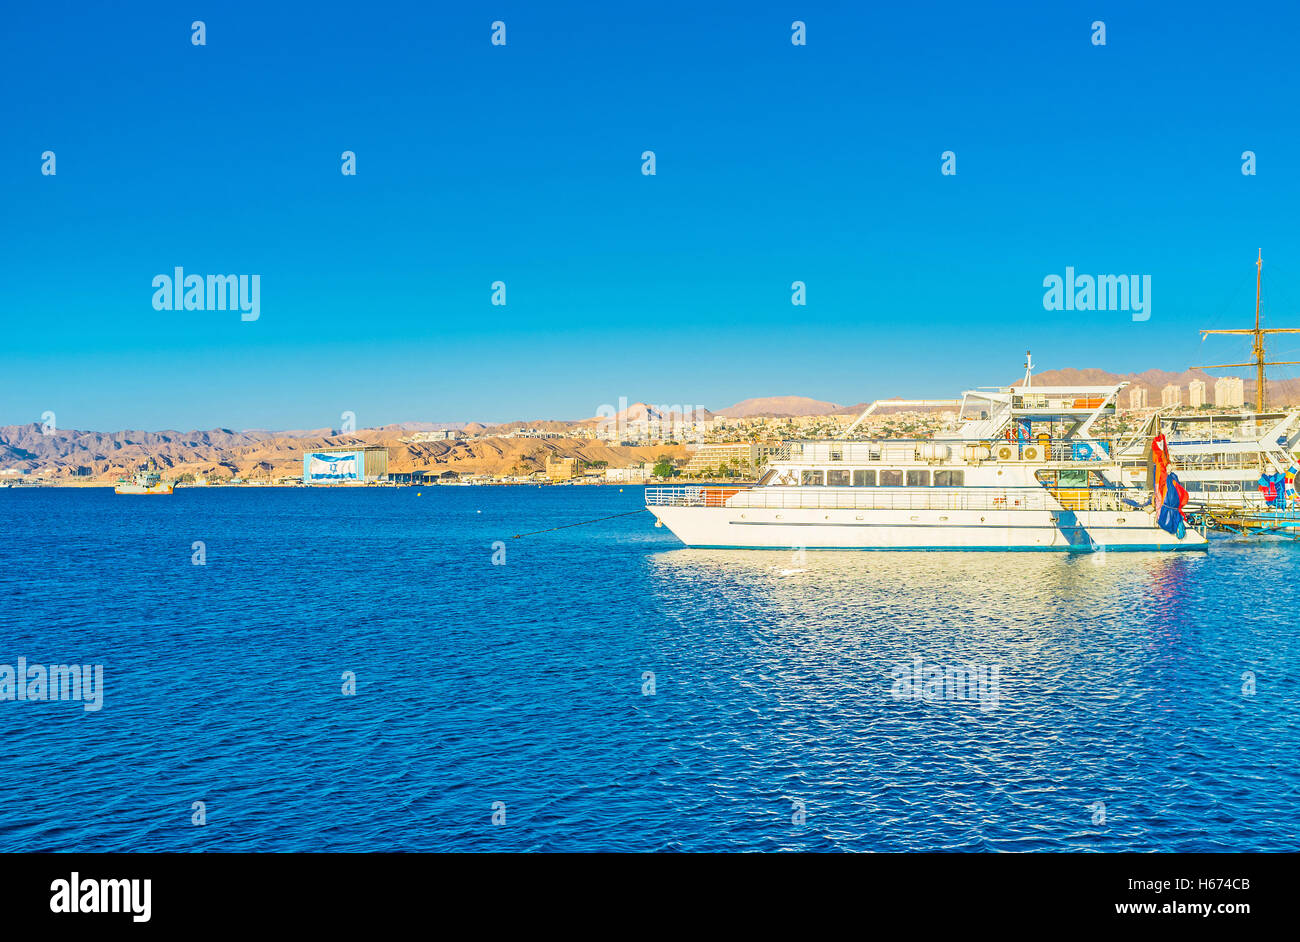 The snow-white pleasure boats in harbor with the mountain coast on the background, Eilat, Israel. Stock Photo